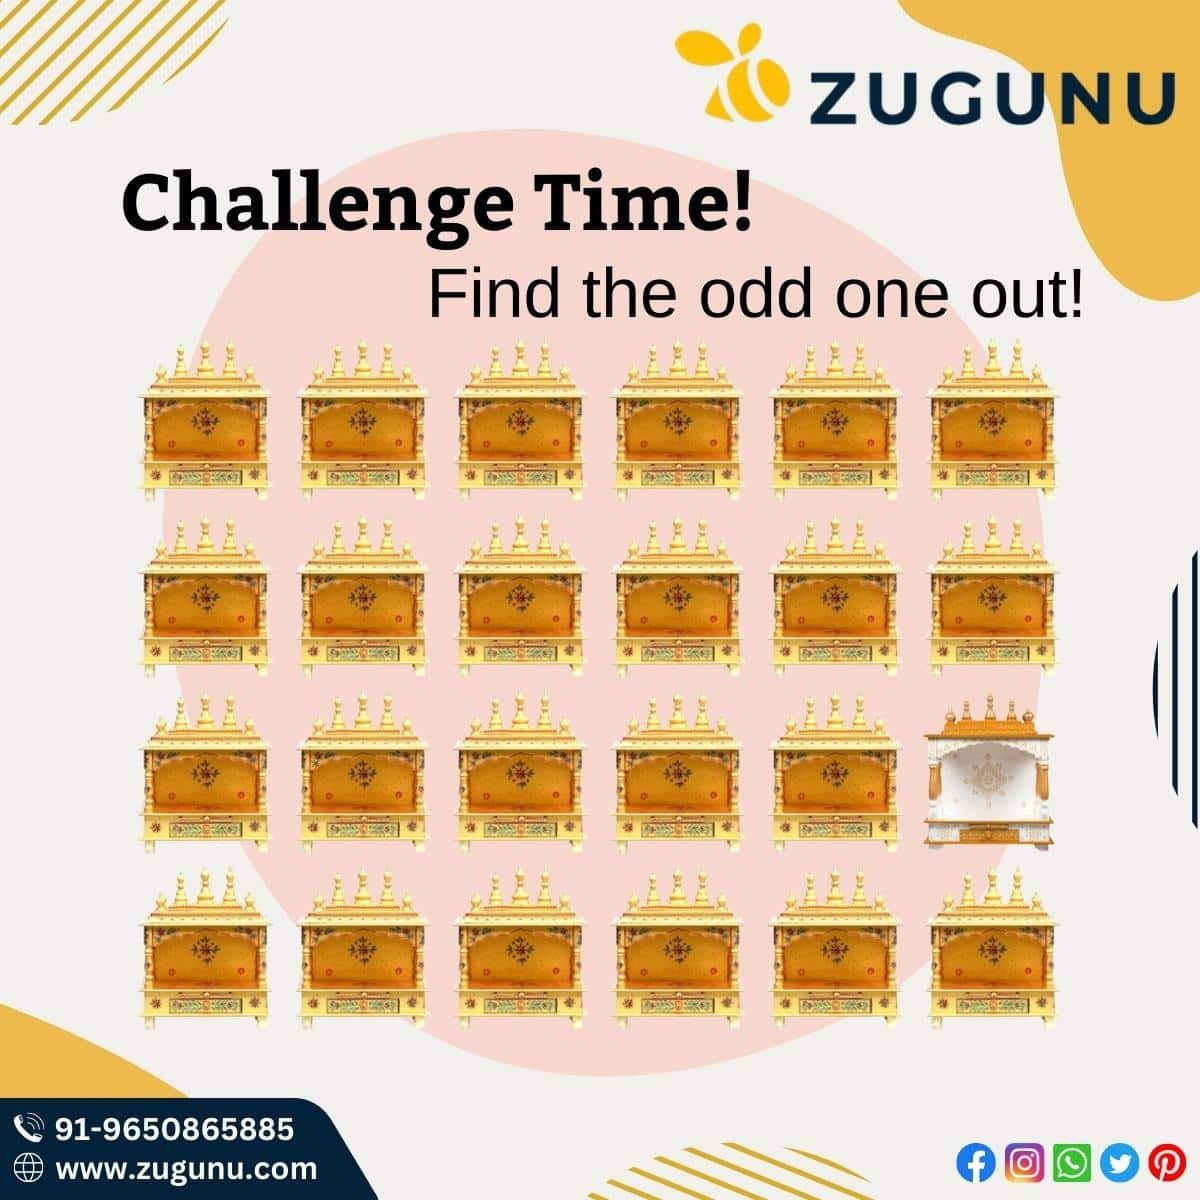 Put Your Skills to the Test with Zugunu Odd One Out Challenge